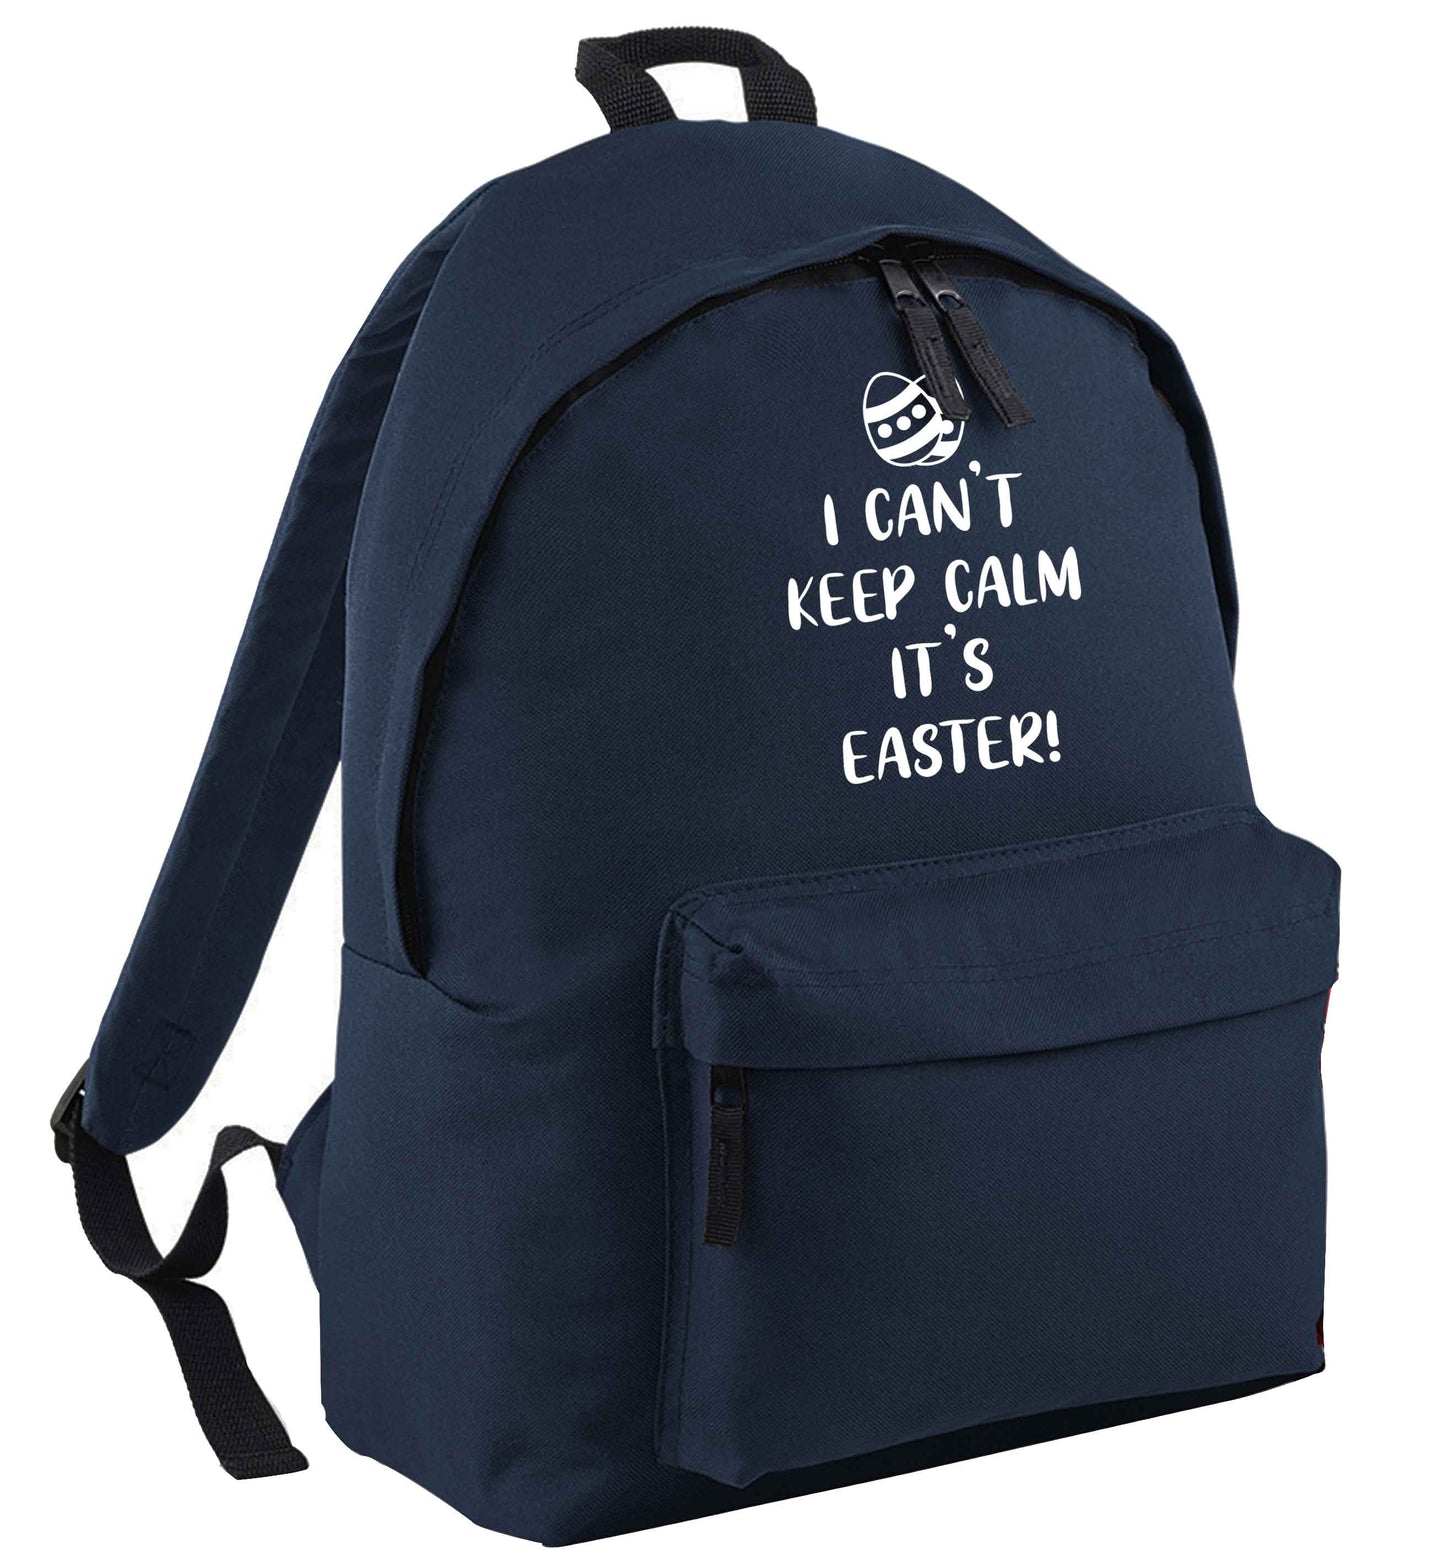 I can't keep calm it's Easter navy adults backpack